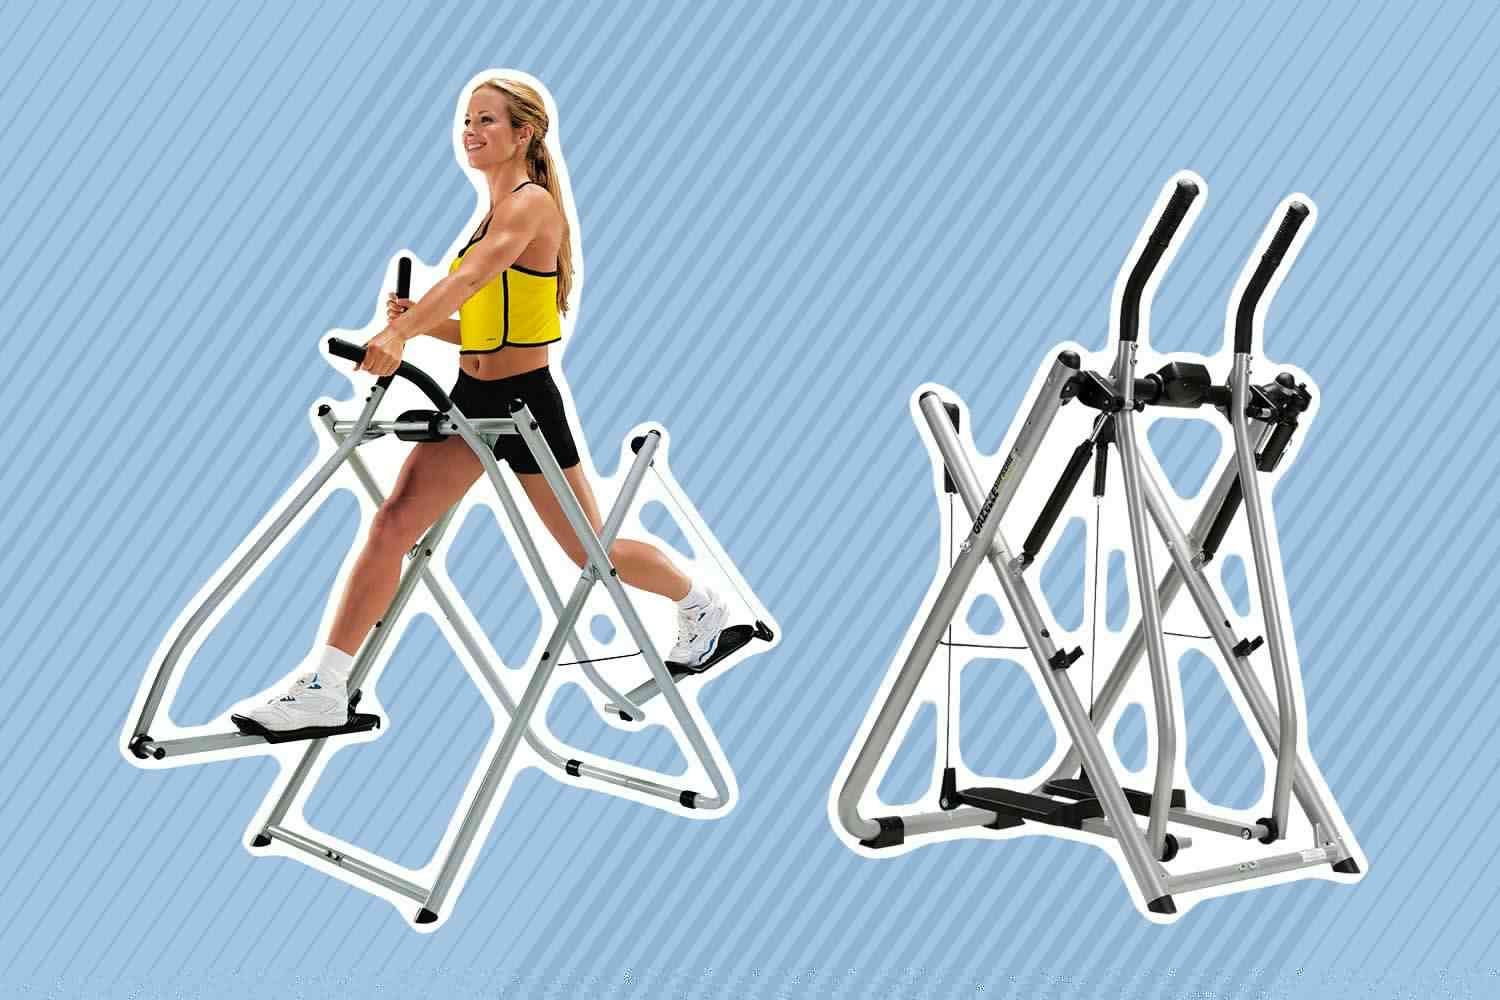 Best Air Walker and Air Gilder Exercise Machines